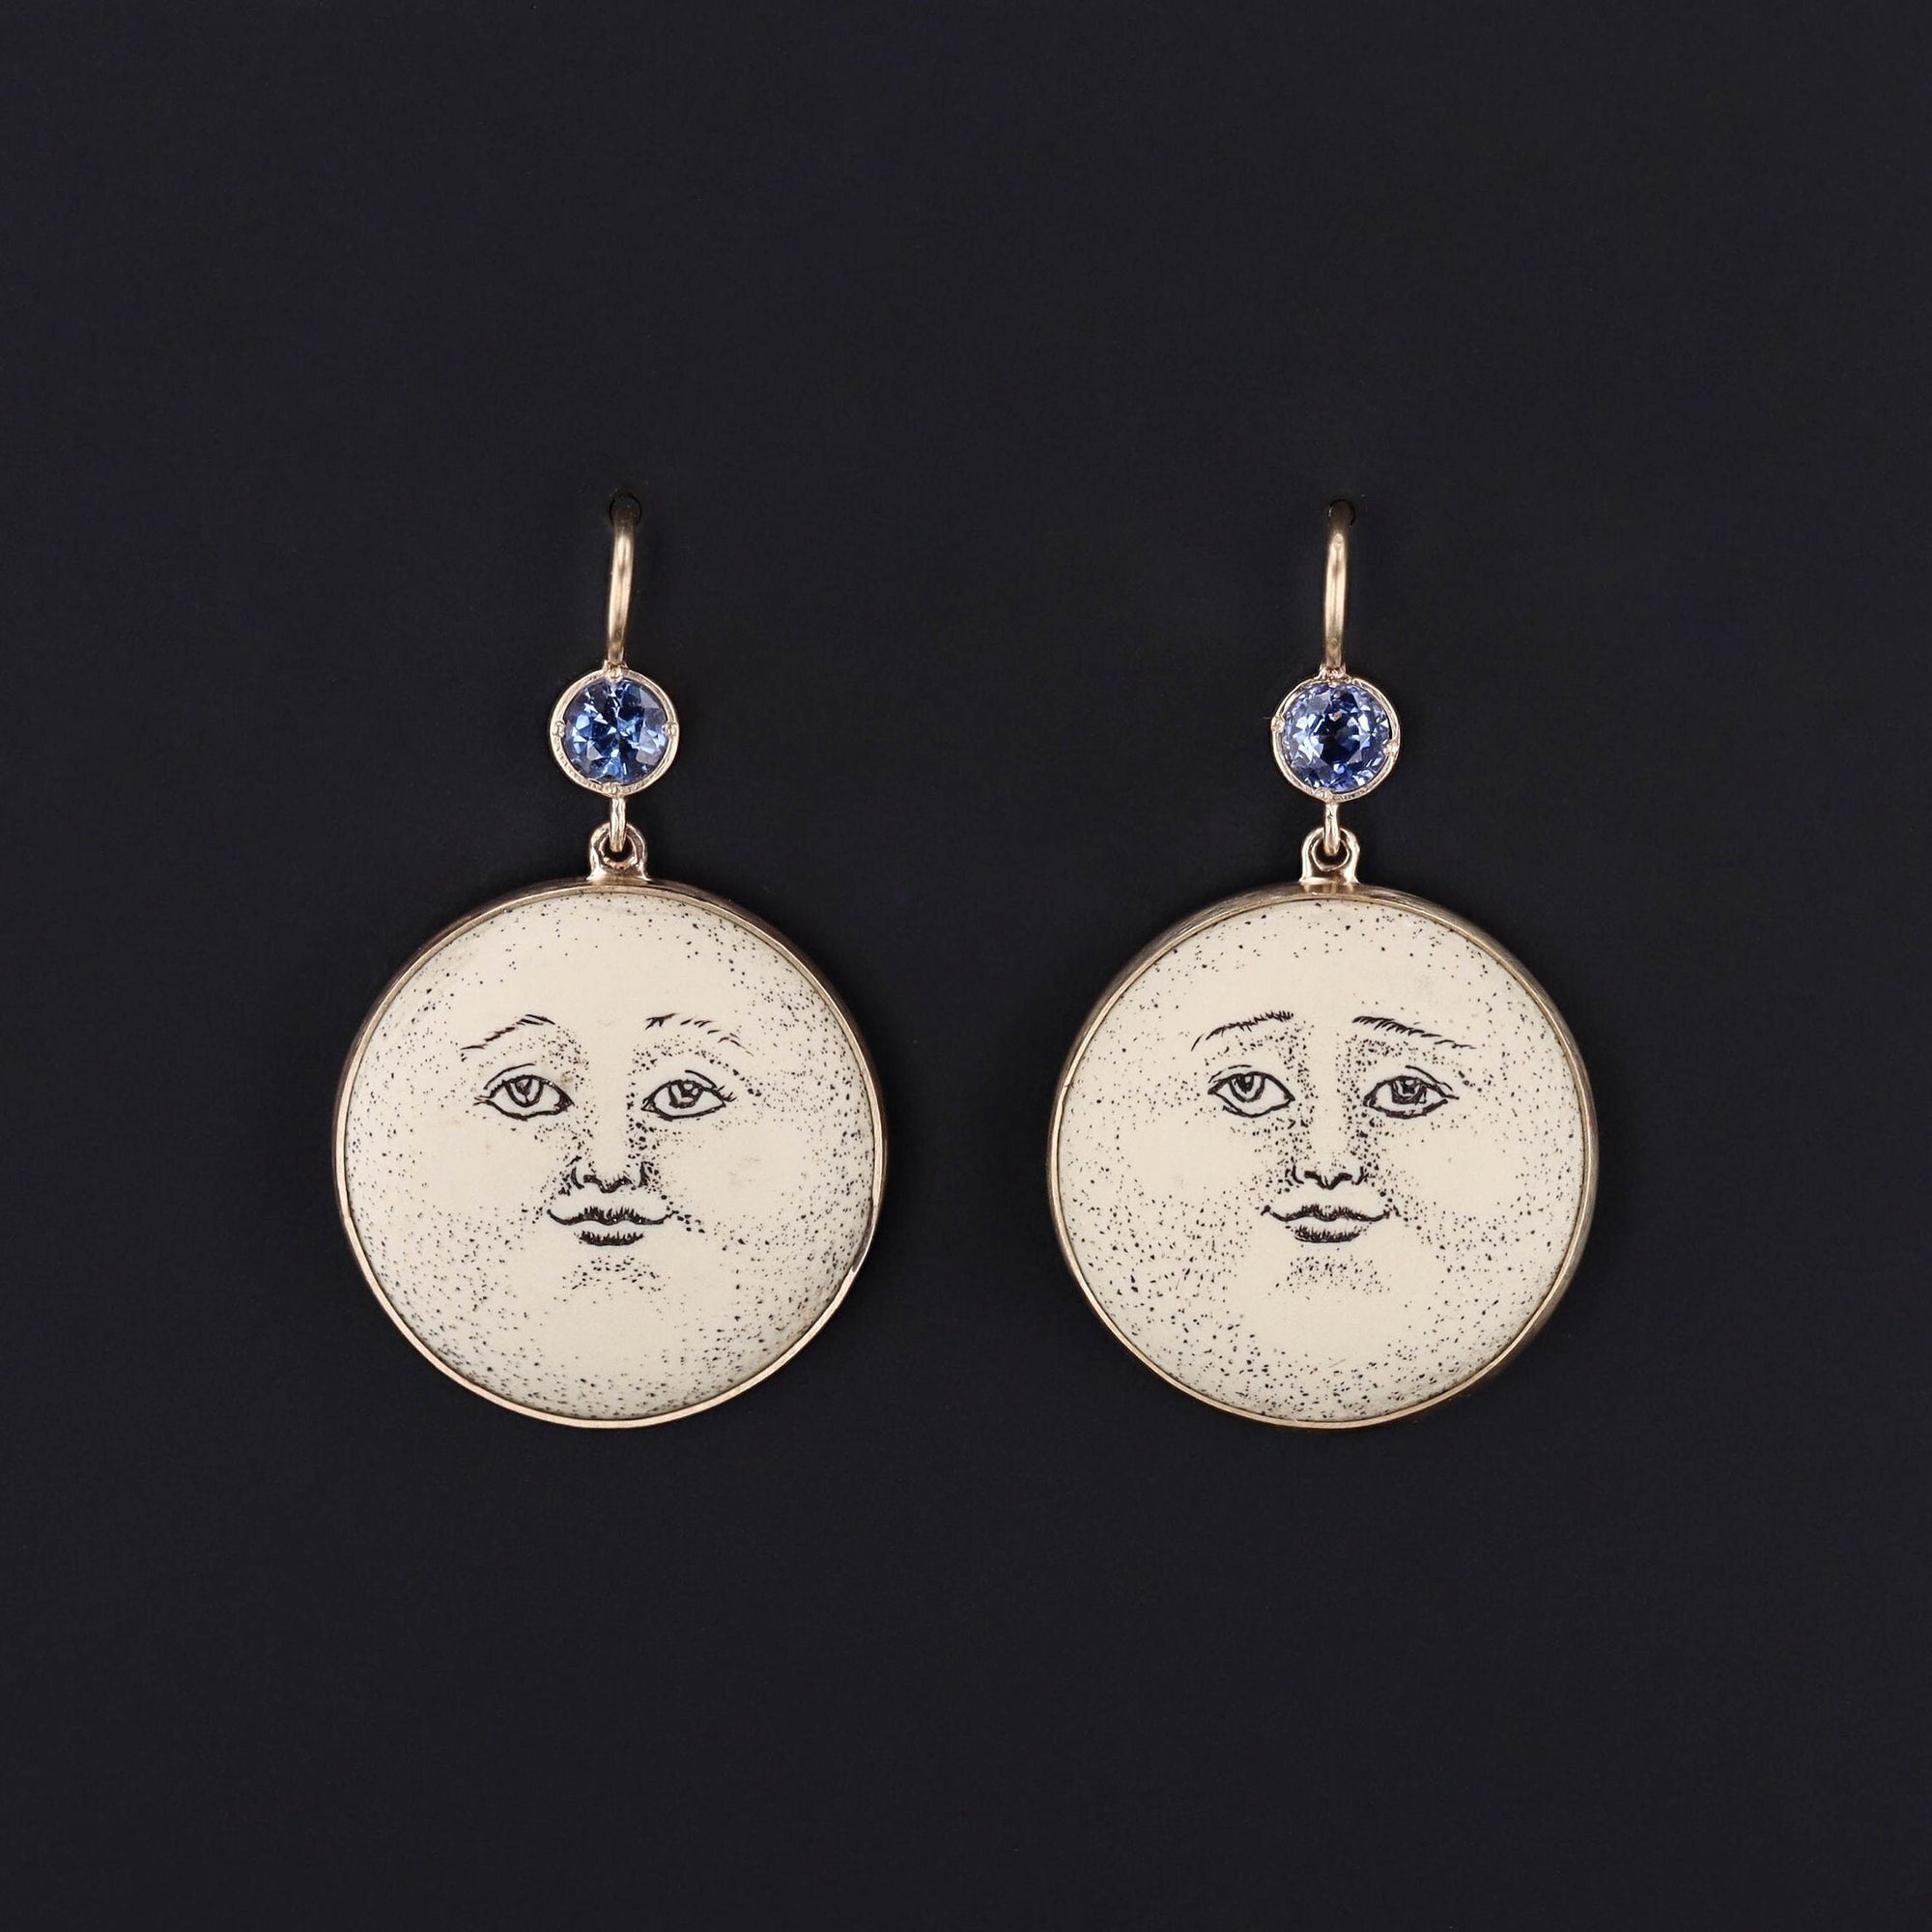 Antique Sapphire & Ceramic Man in the Moon Conversion Earrings 14k Gold